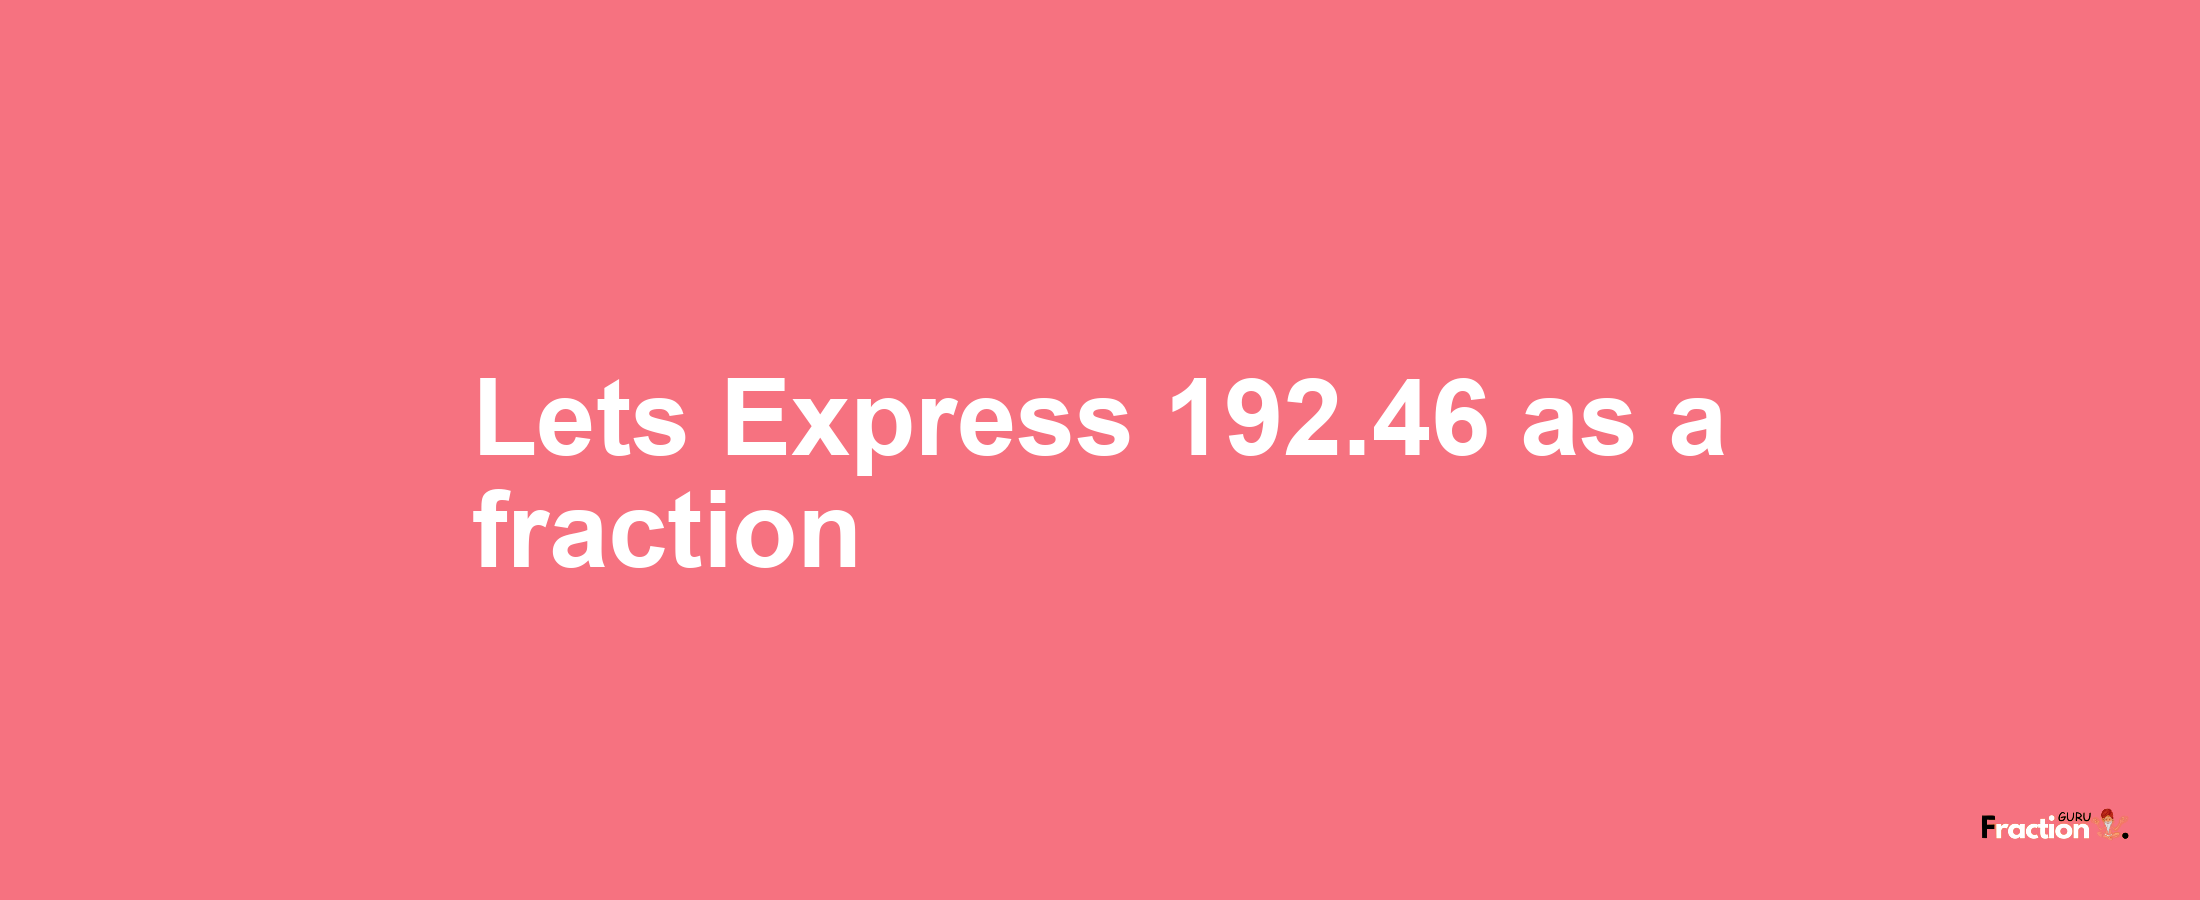 Lets Express 192.46 as afraction